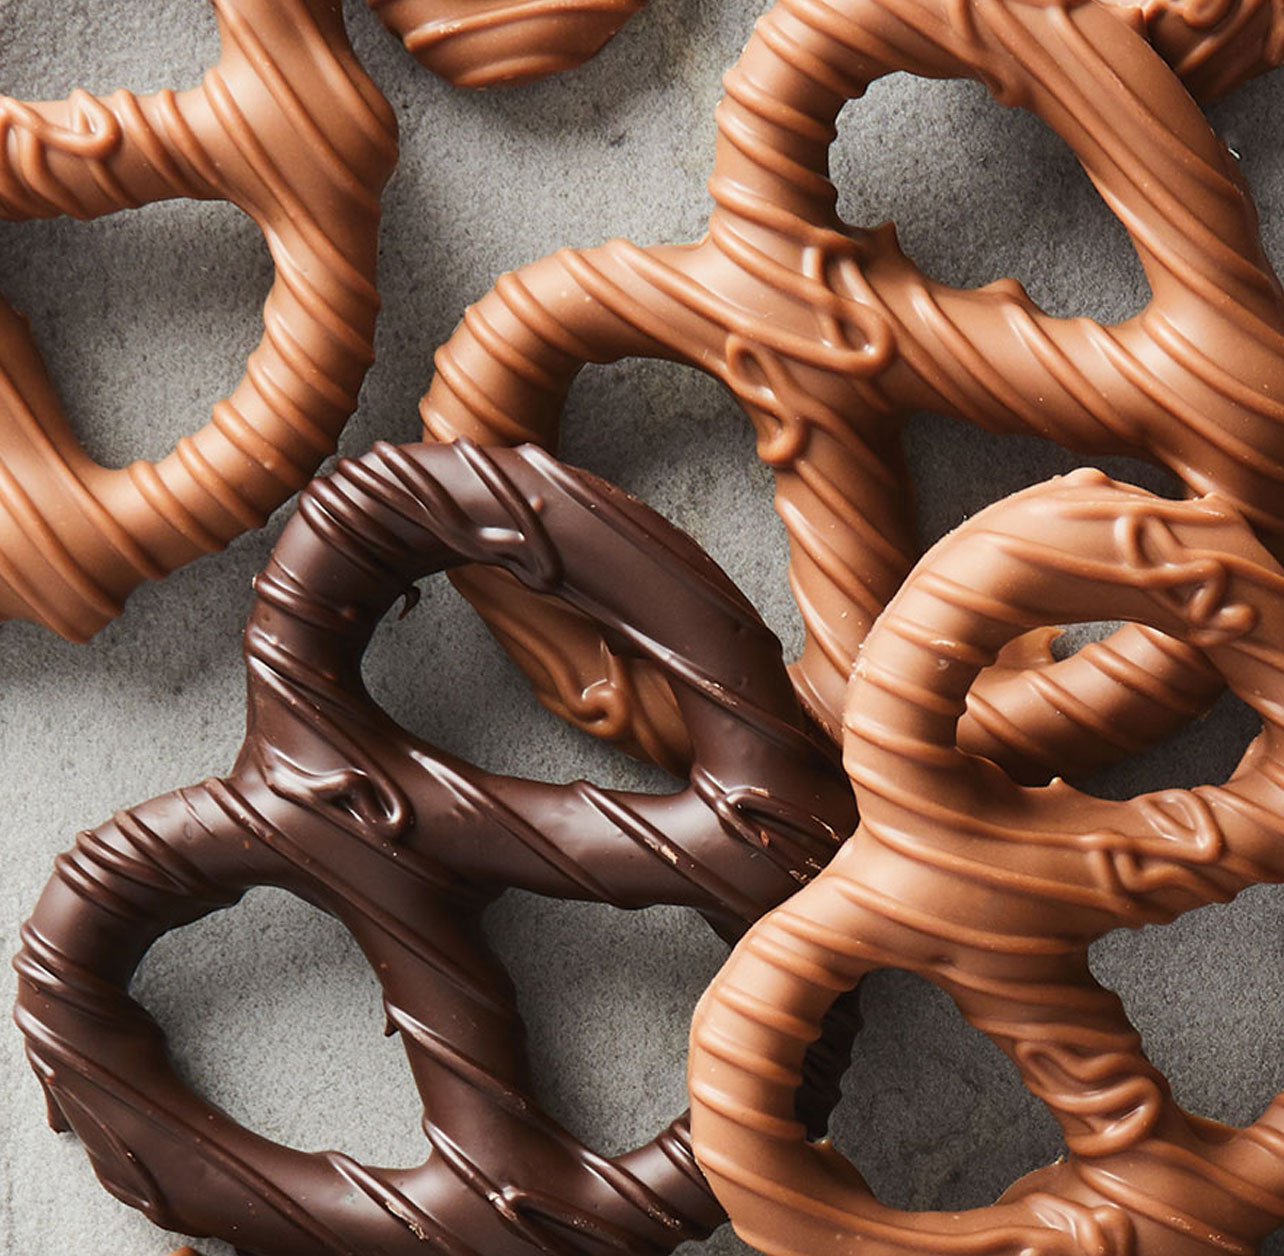  - Carber Chocolates - Delicious Hand-Made Chocolates - Chocolate Covered Pretzels